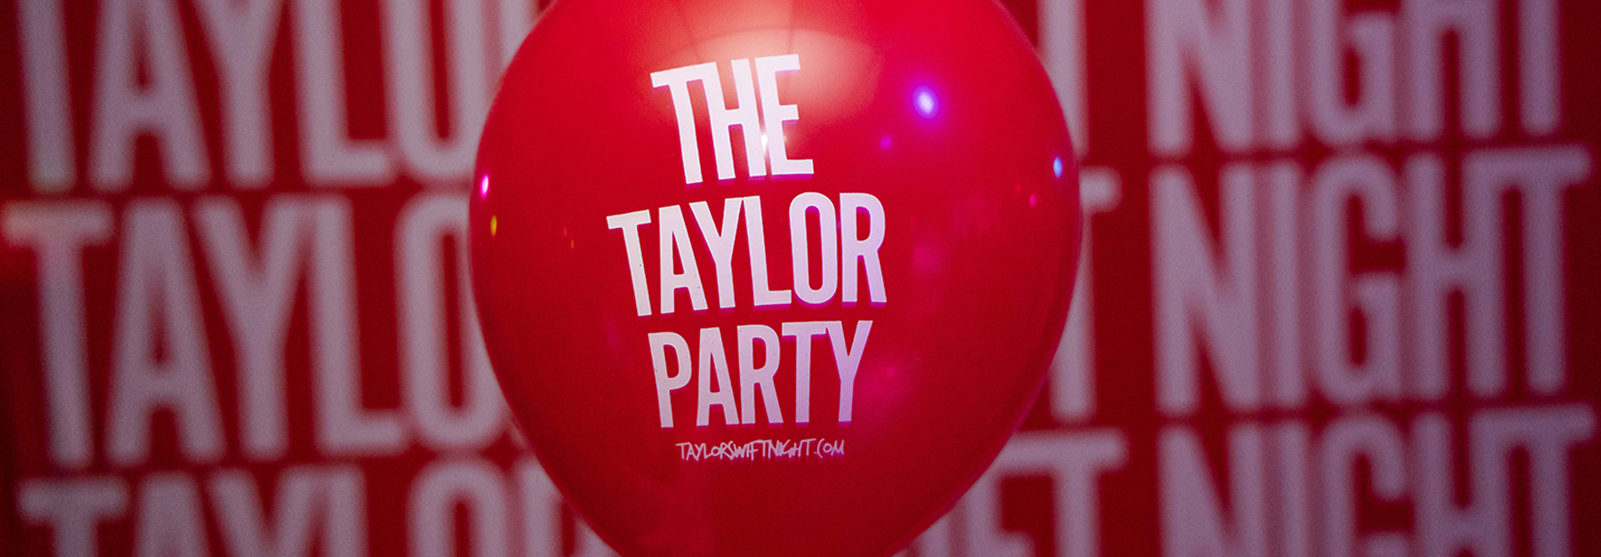  THE TAYLOR PARTY: TAYLOR SWIFT NIGHT